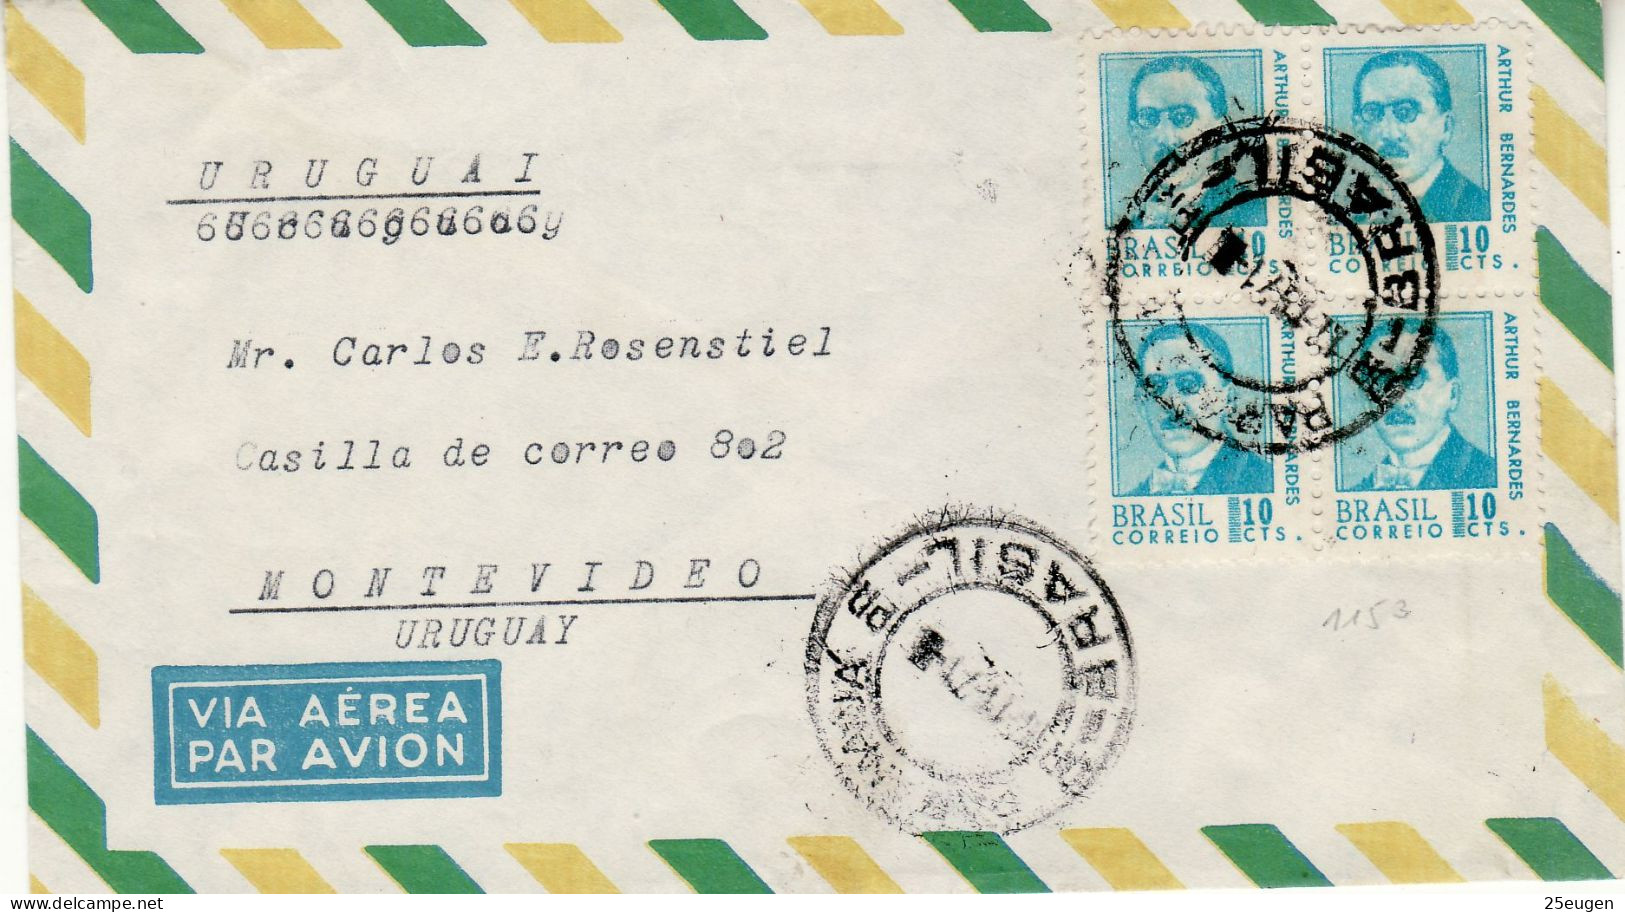 BRAZIL 1971 AIRMAIL  LETTER SENT TO MONTEVIDEO - Covers & Documents